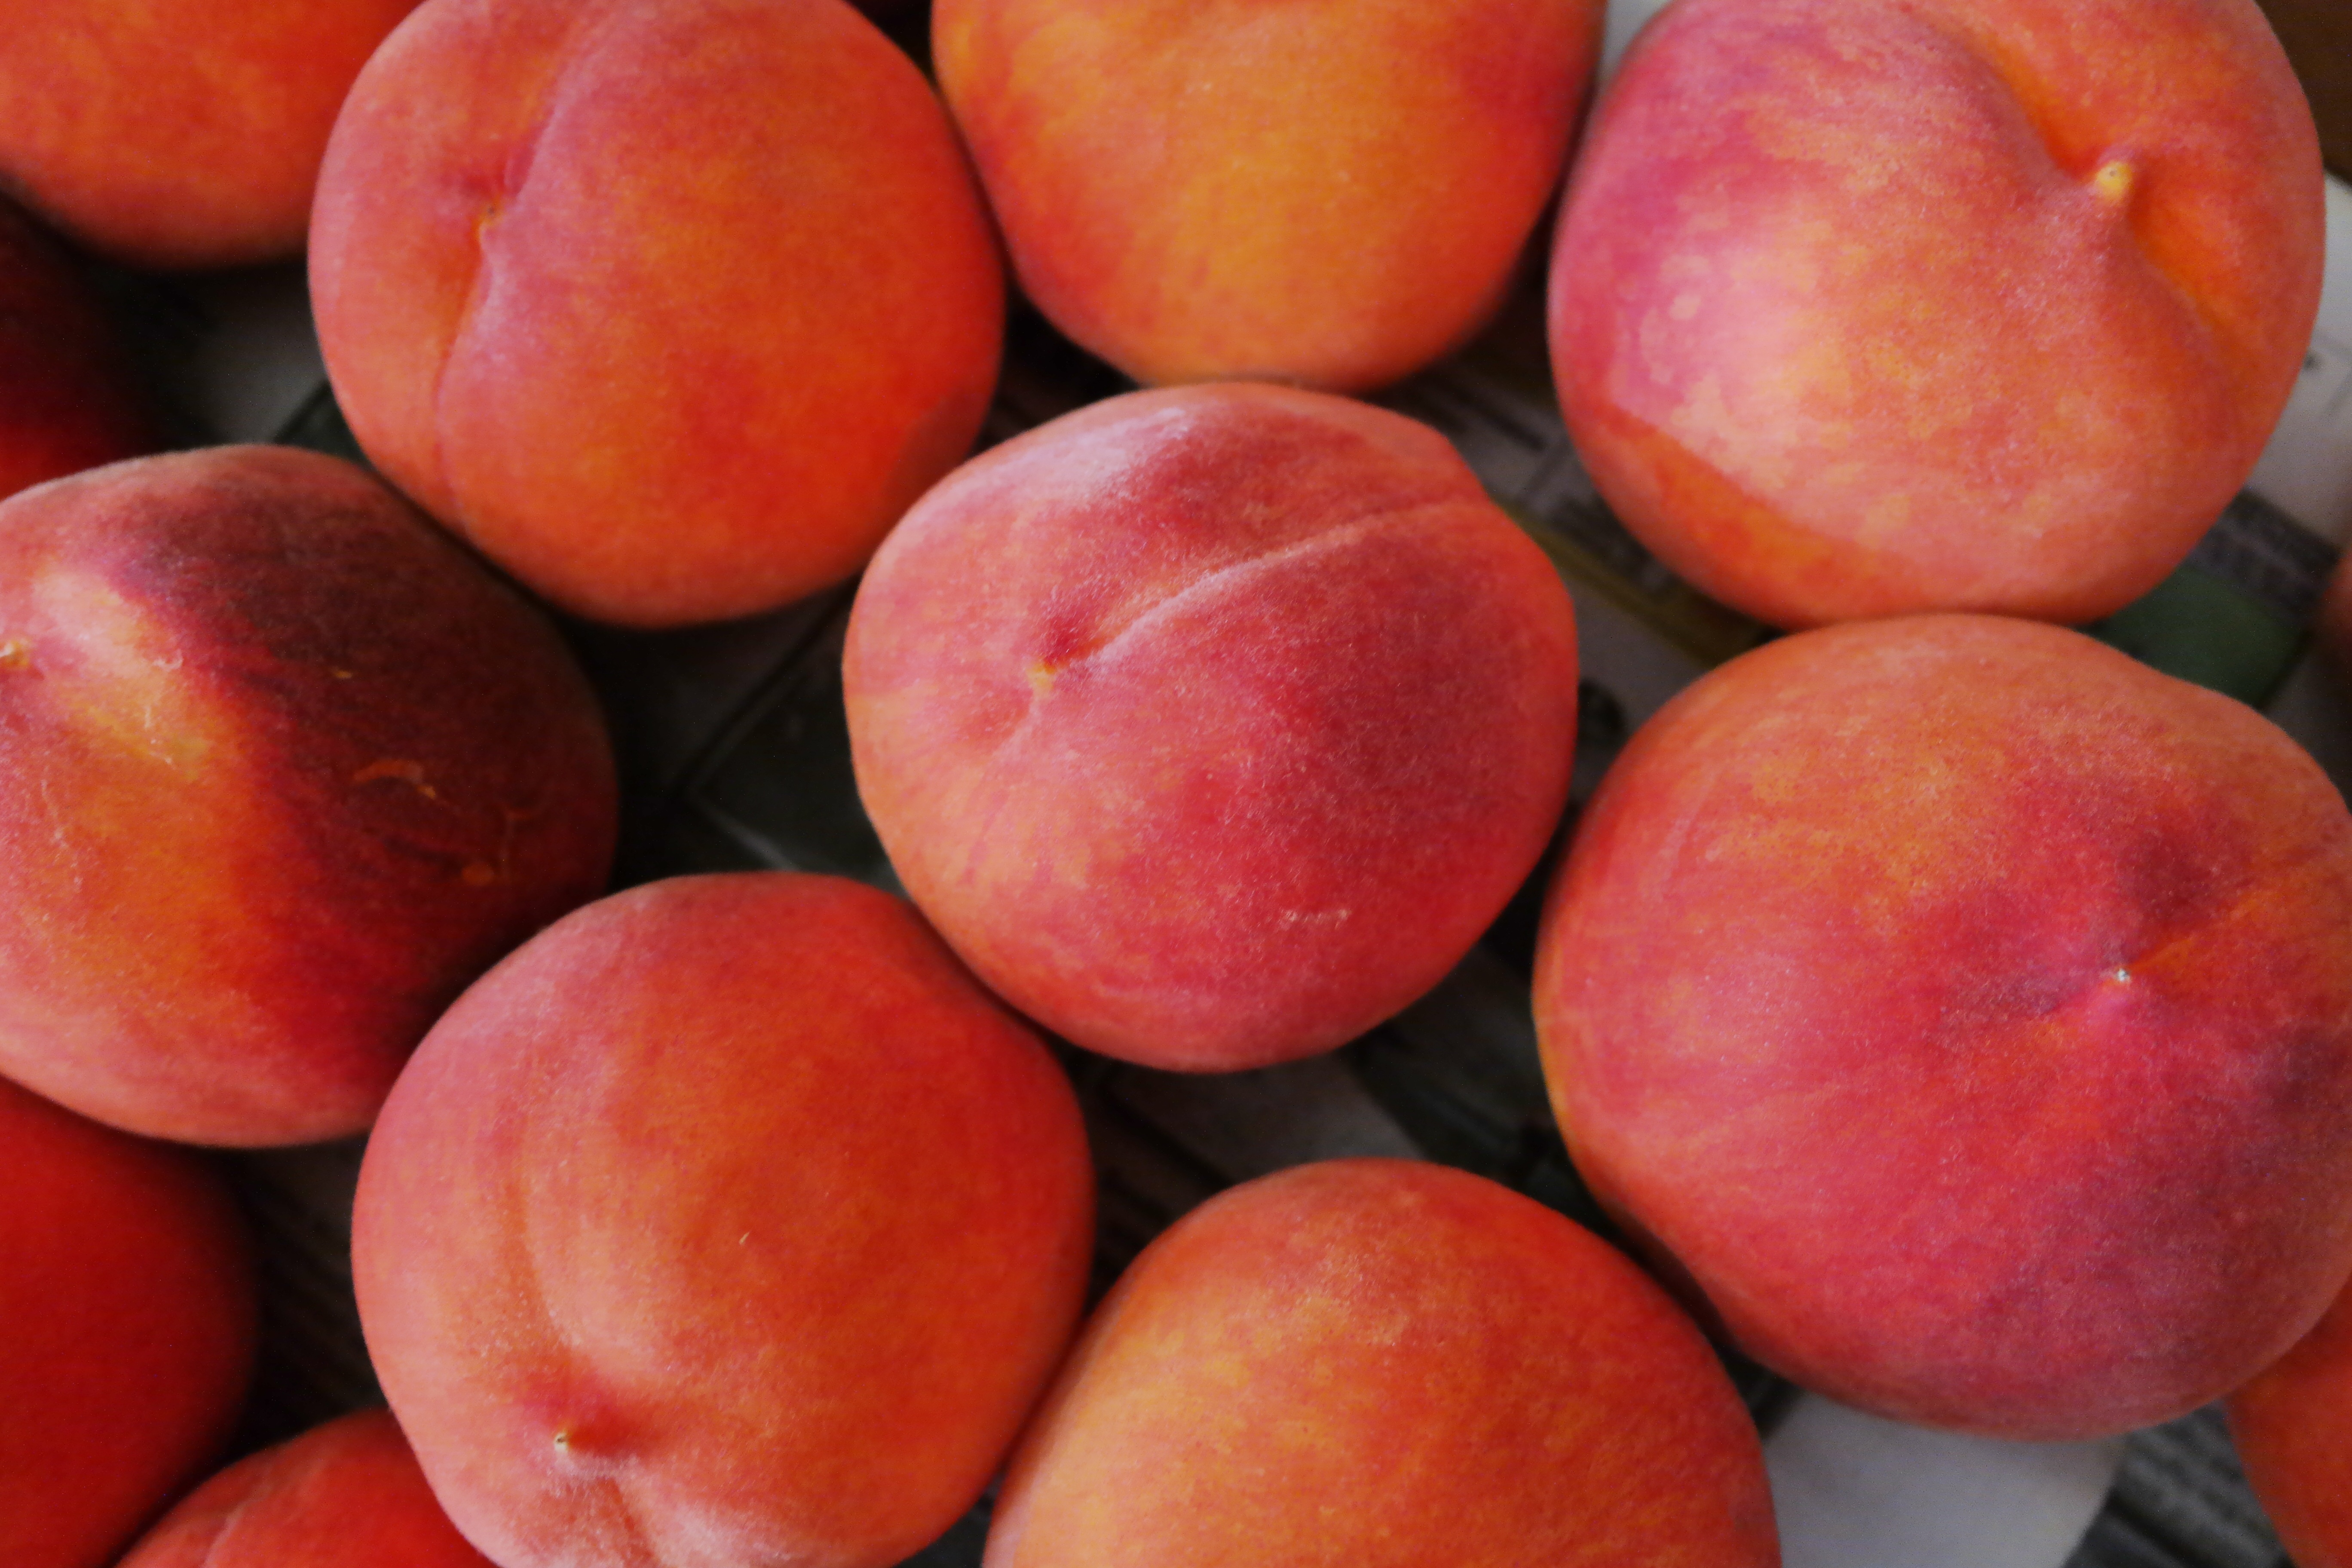 156477 download wallpaper ripe, fruits, food, peaches screensavers and pictures for free